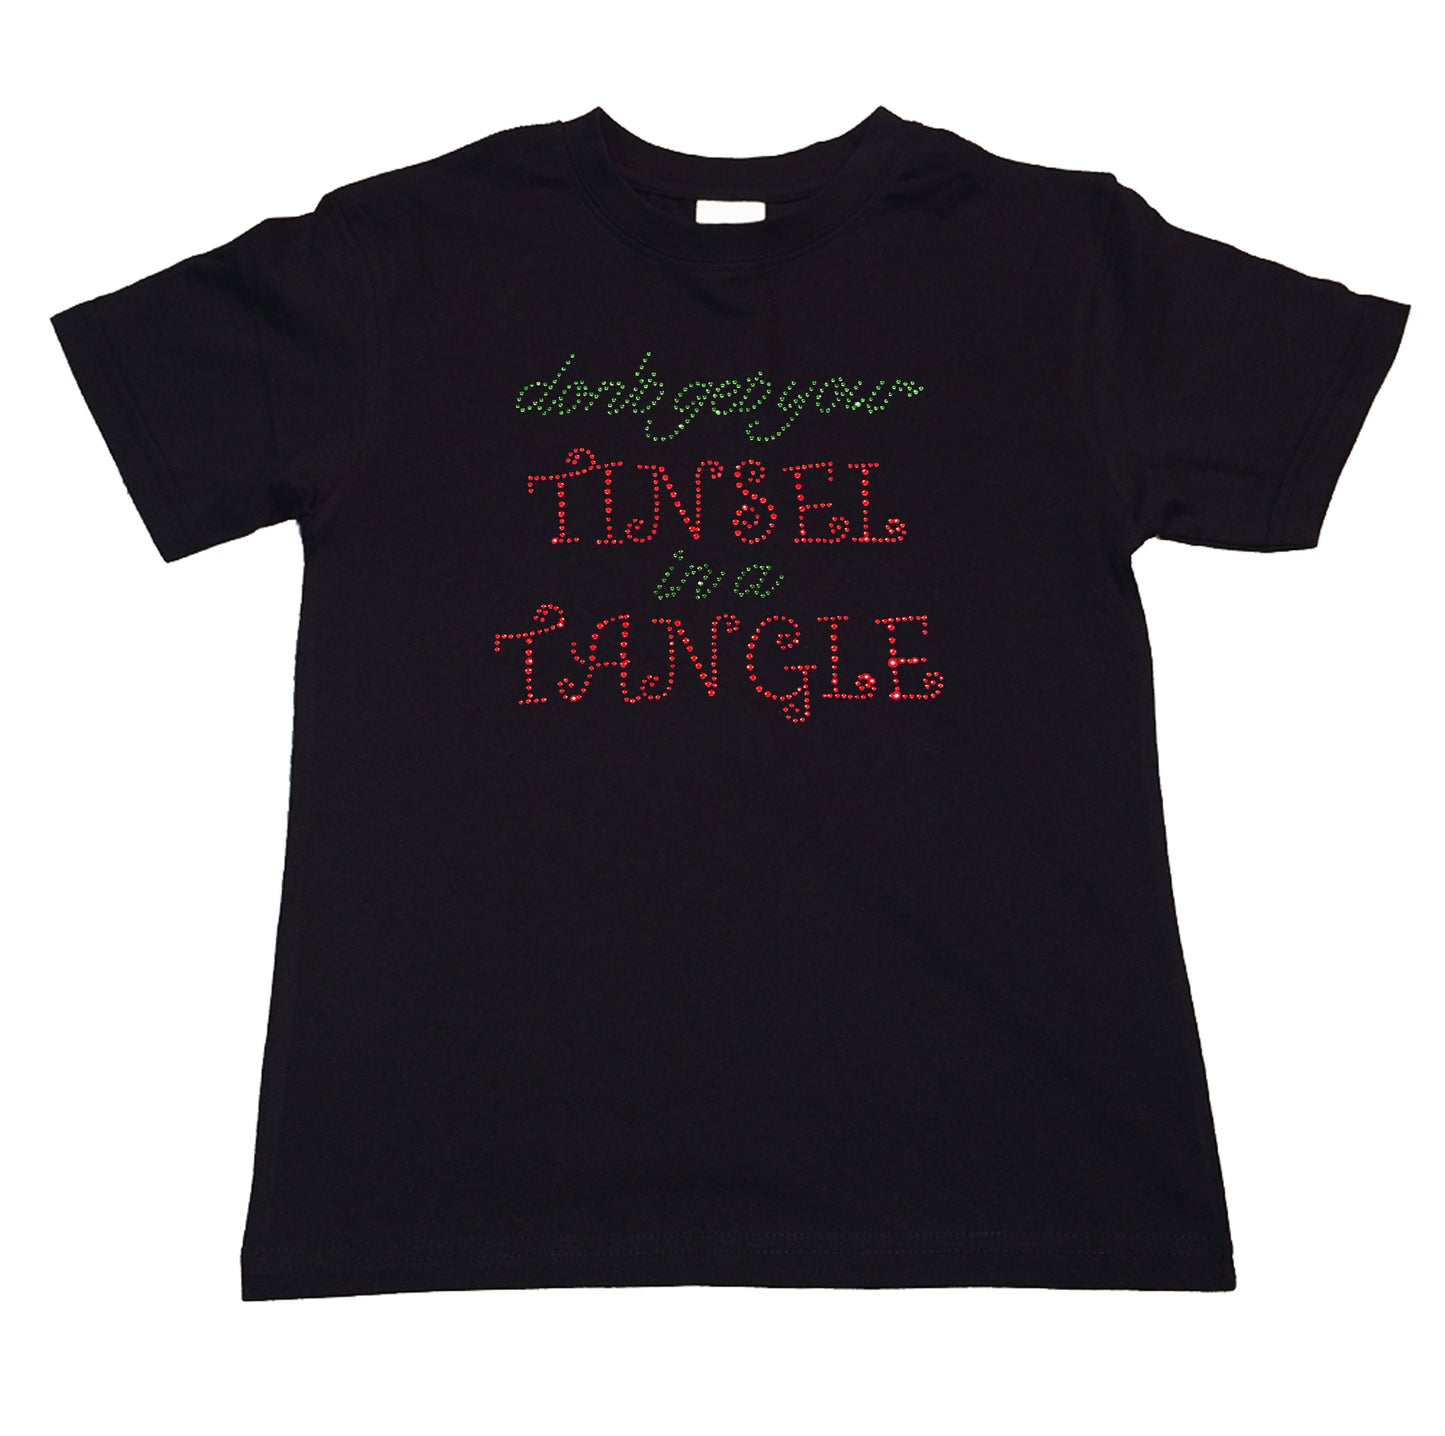 Girls Rhinestone T-Shirt " Don't Get Your Tinsel in a Tangle in Rhinestones " Kids Size 3 to 14 Available